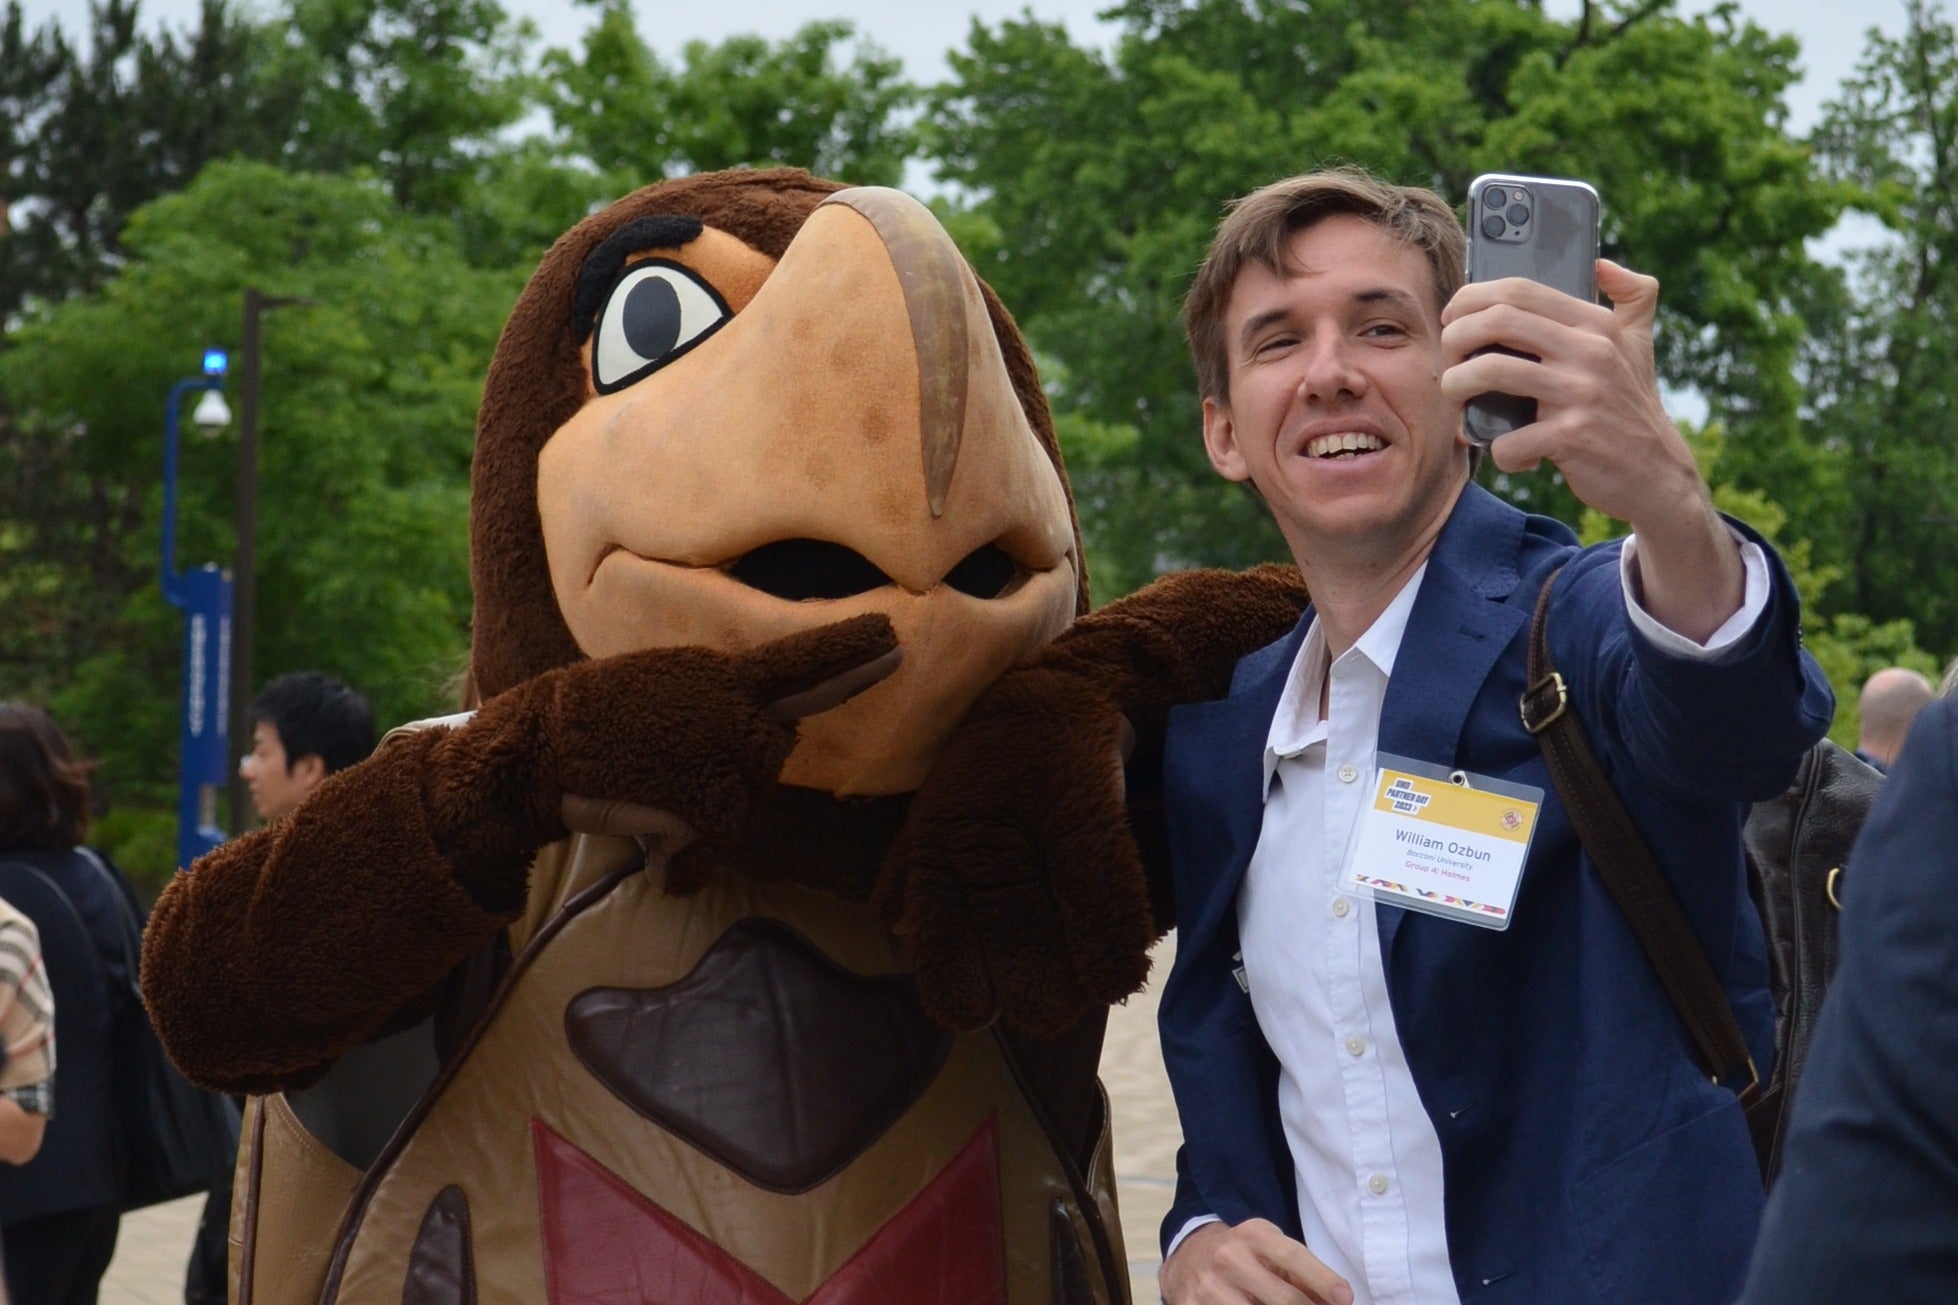 Testudo poses for a selfie with a man.